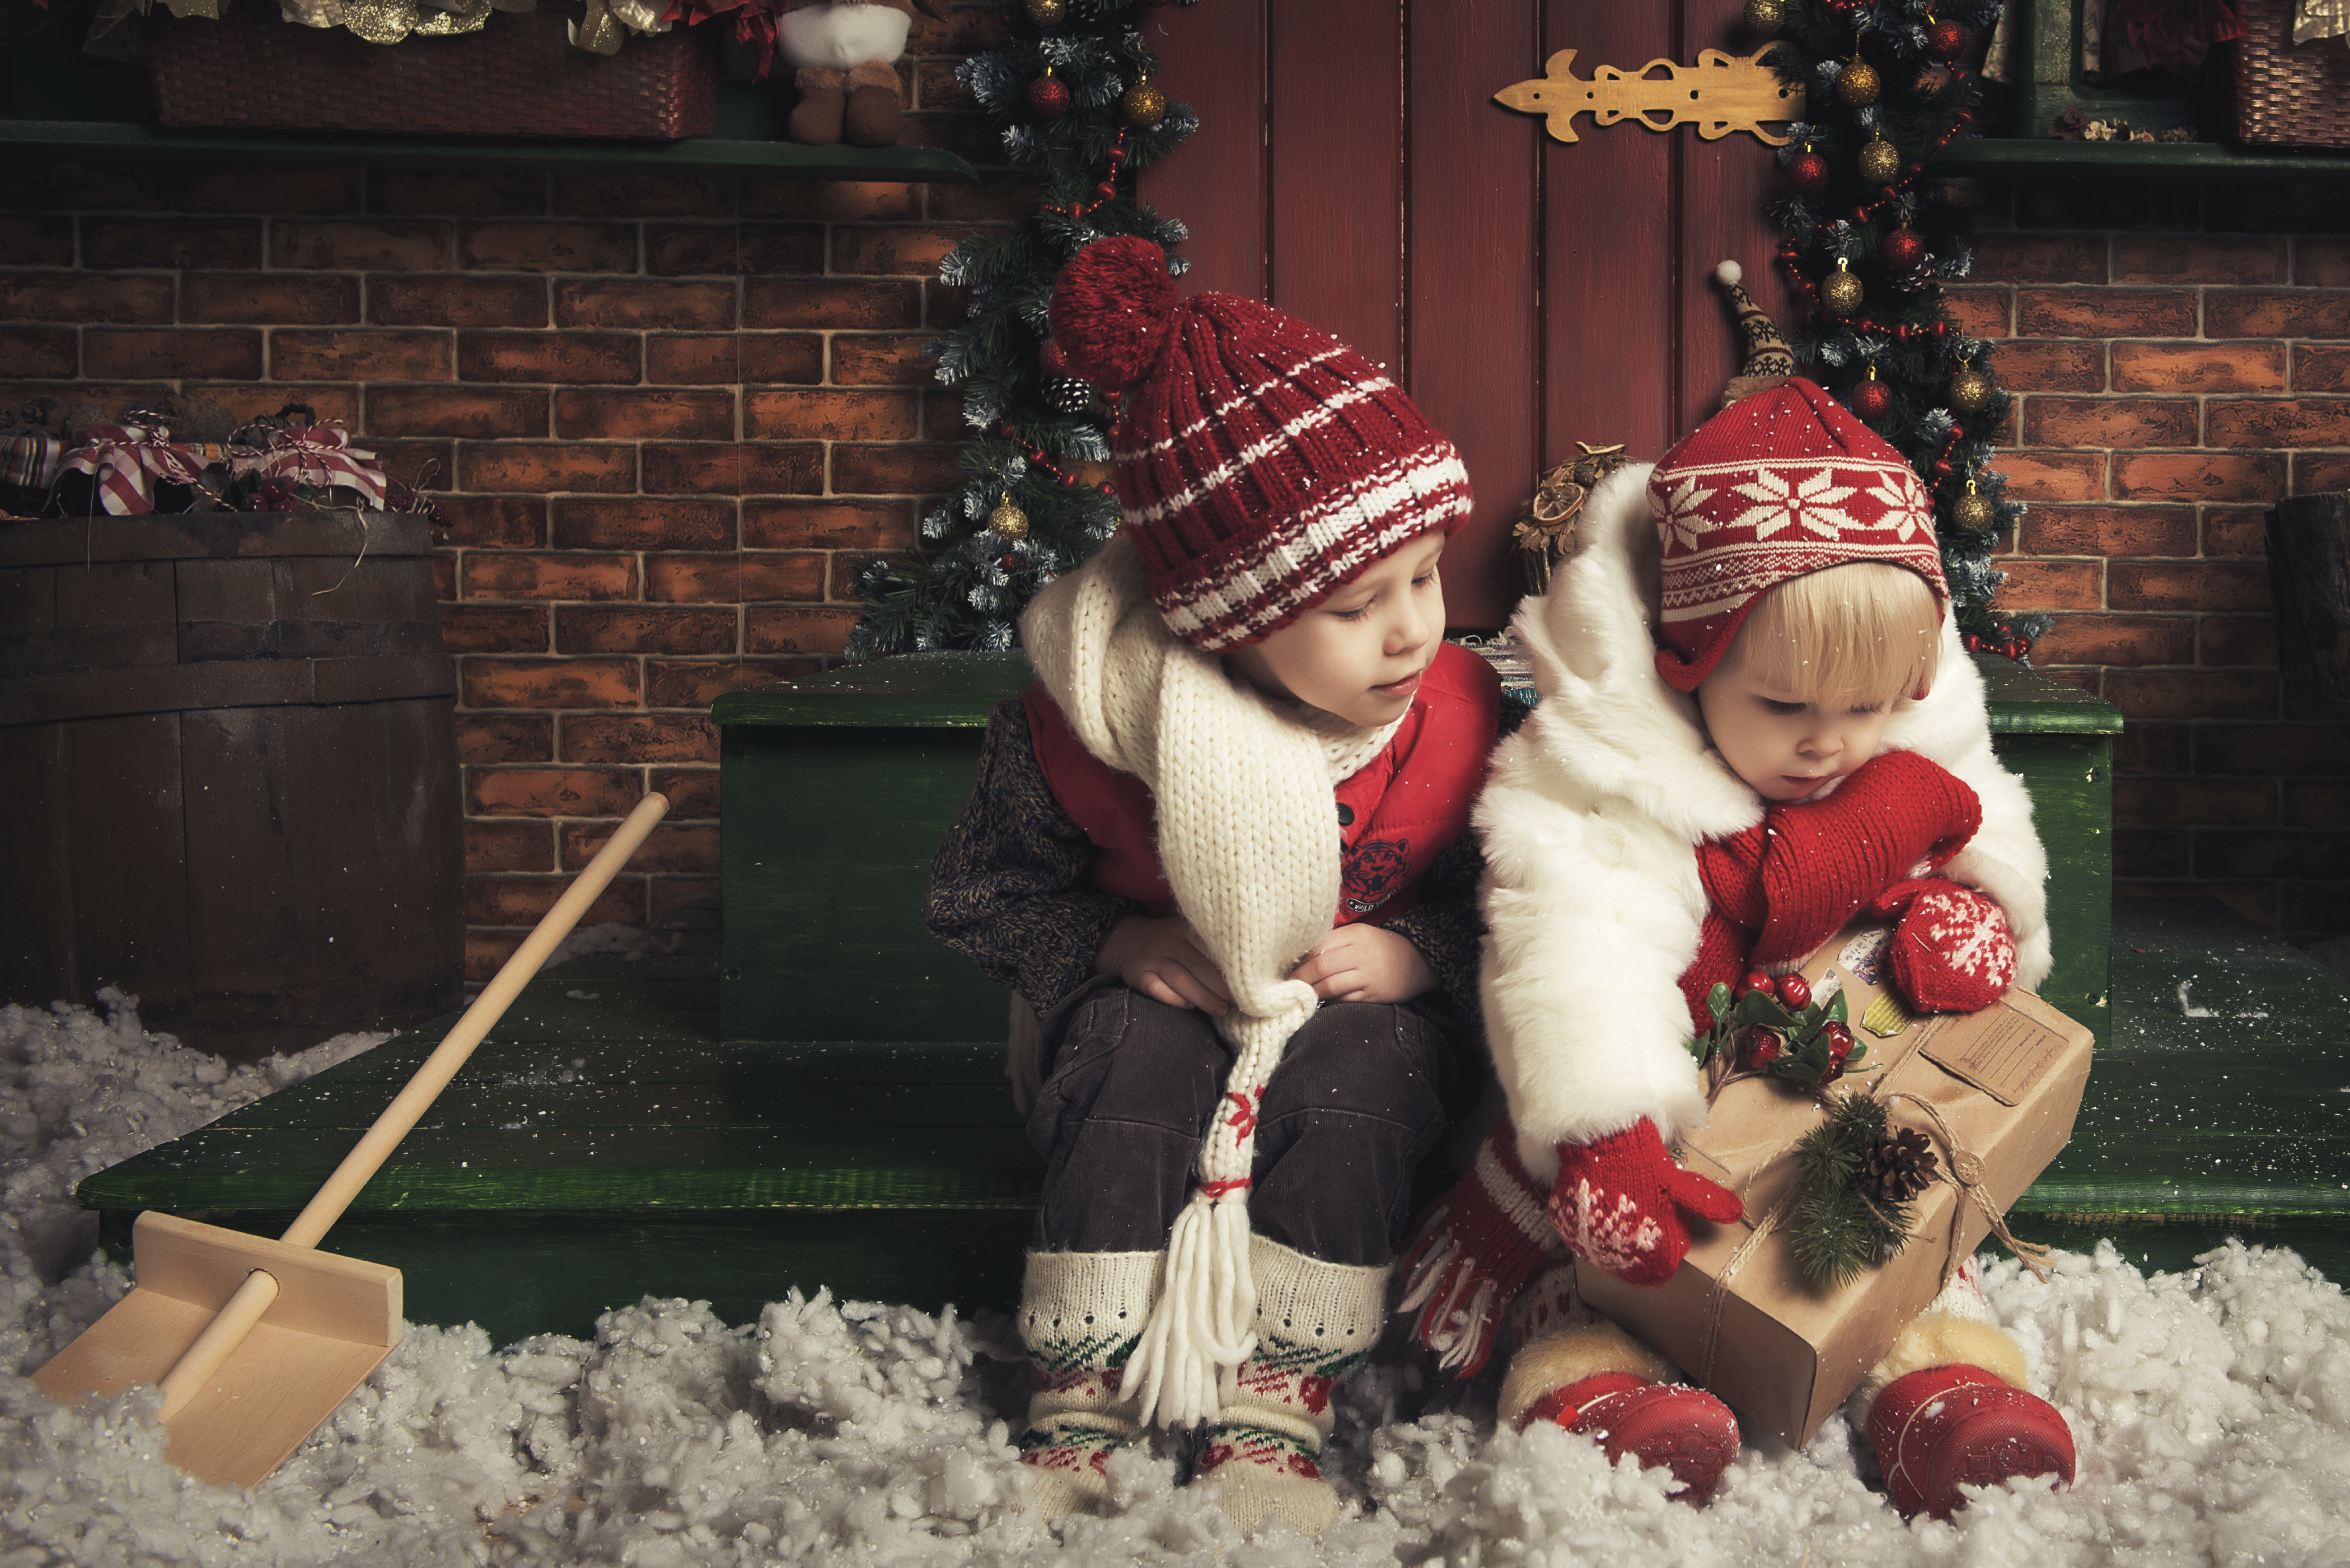 Two children with coats haps gloves sitting on porch and snow